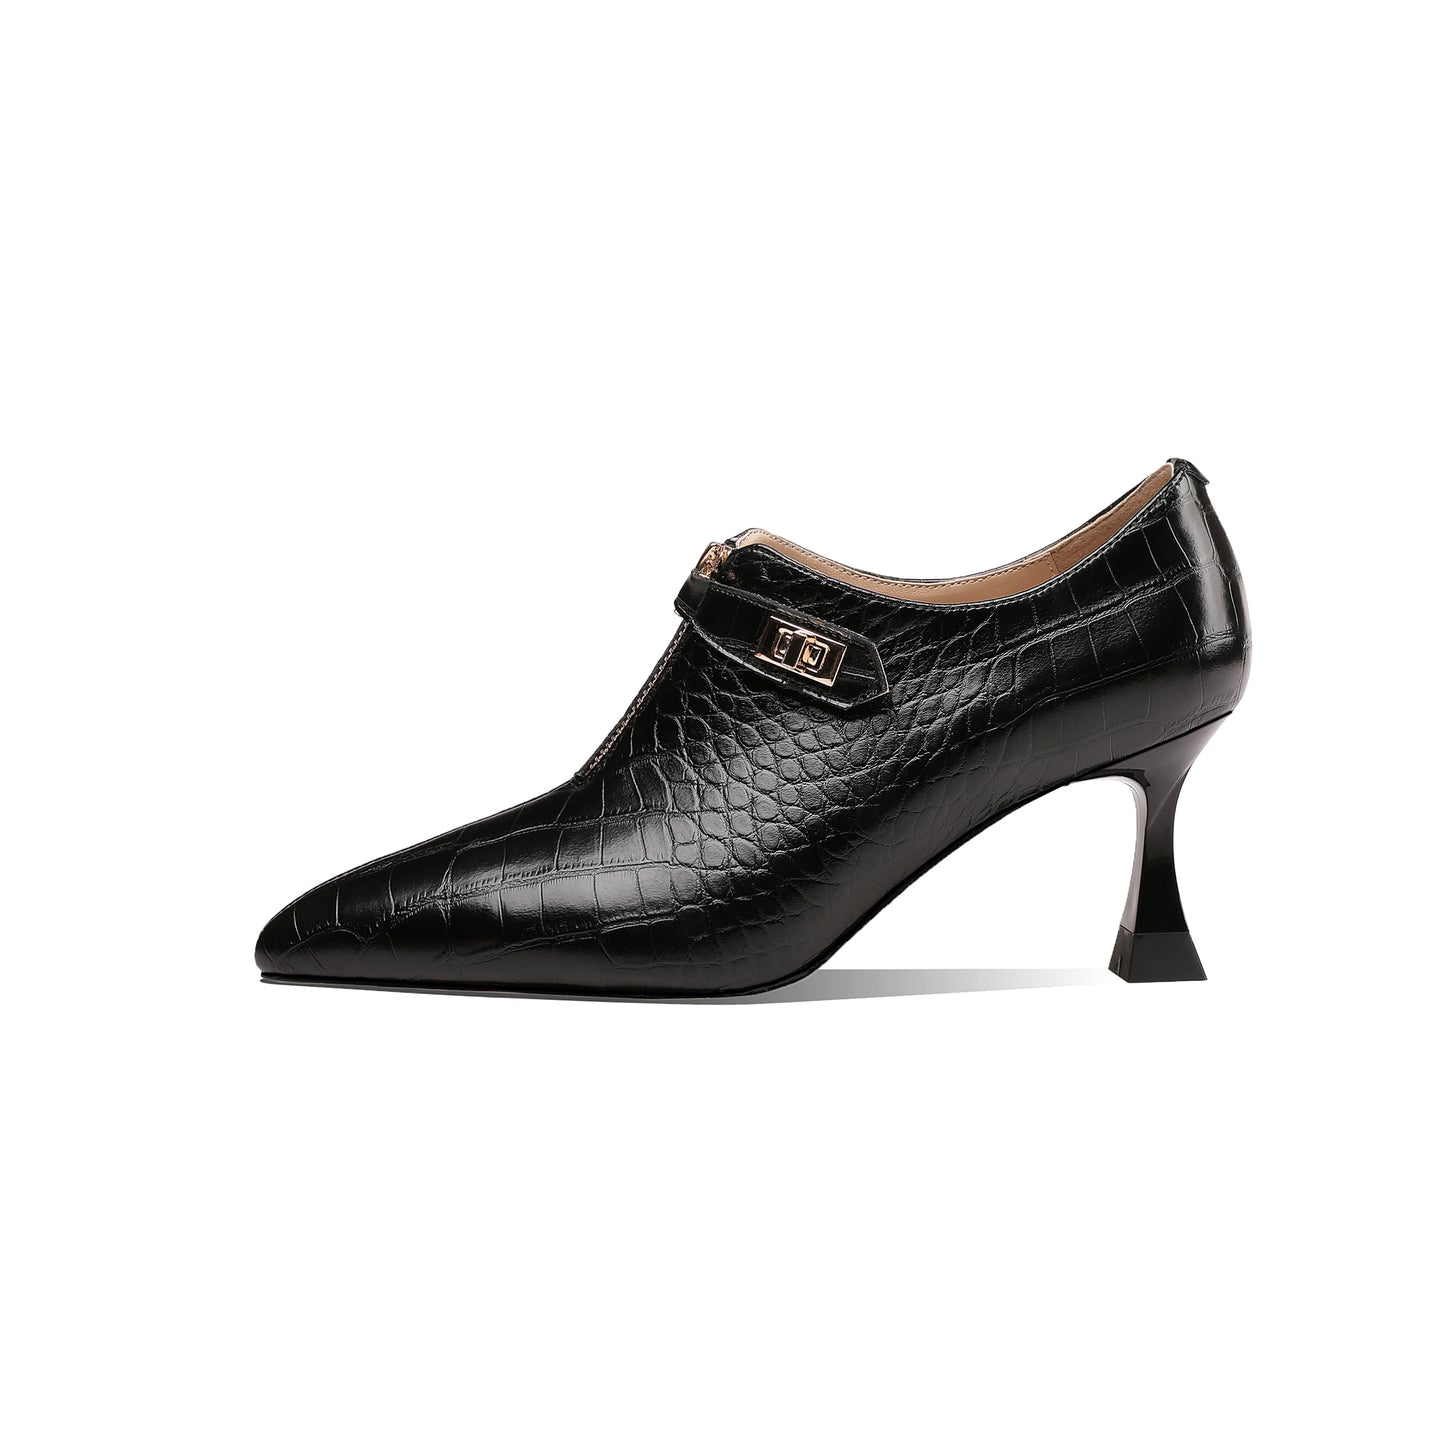 TinaCus Genuine Leather Women's Handmade Pointed Toe Front Zipper Checkered Oxford Pumps